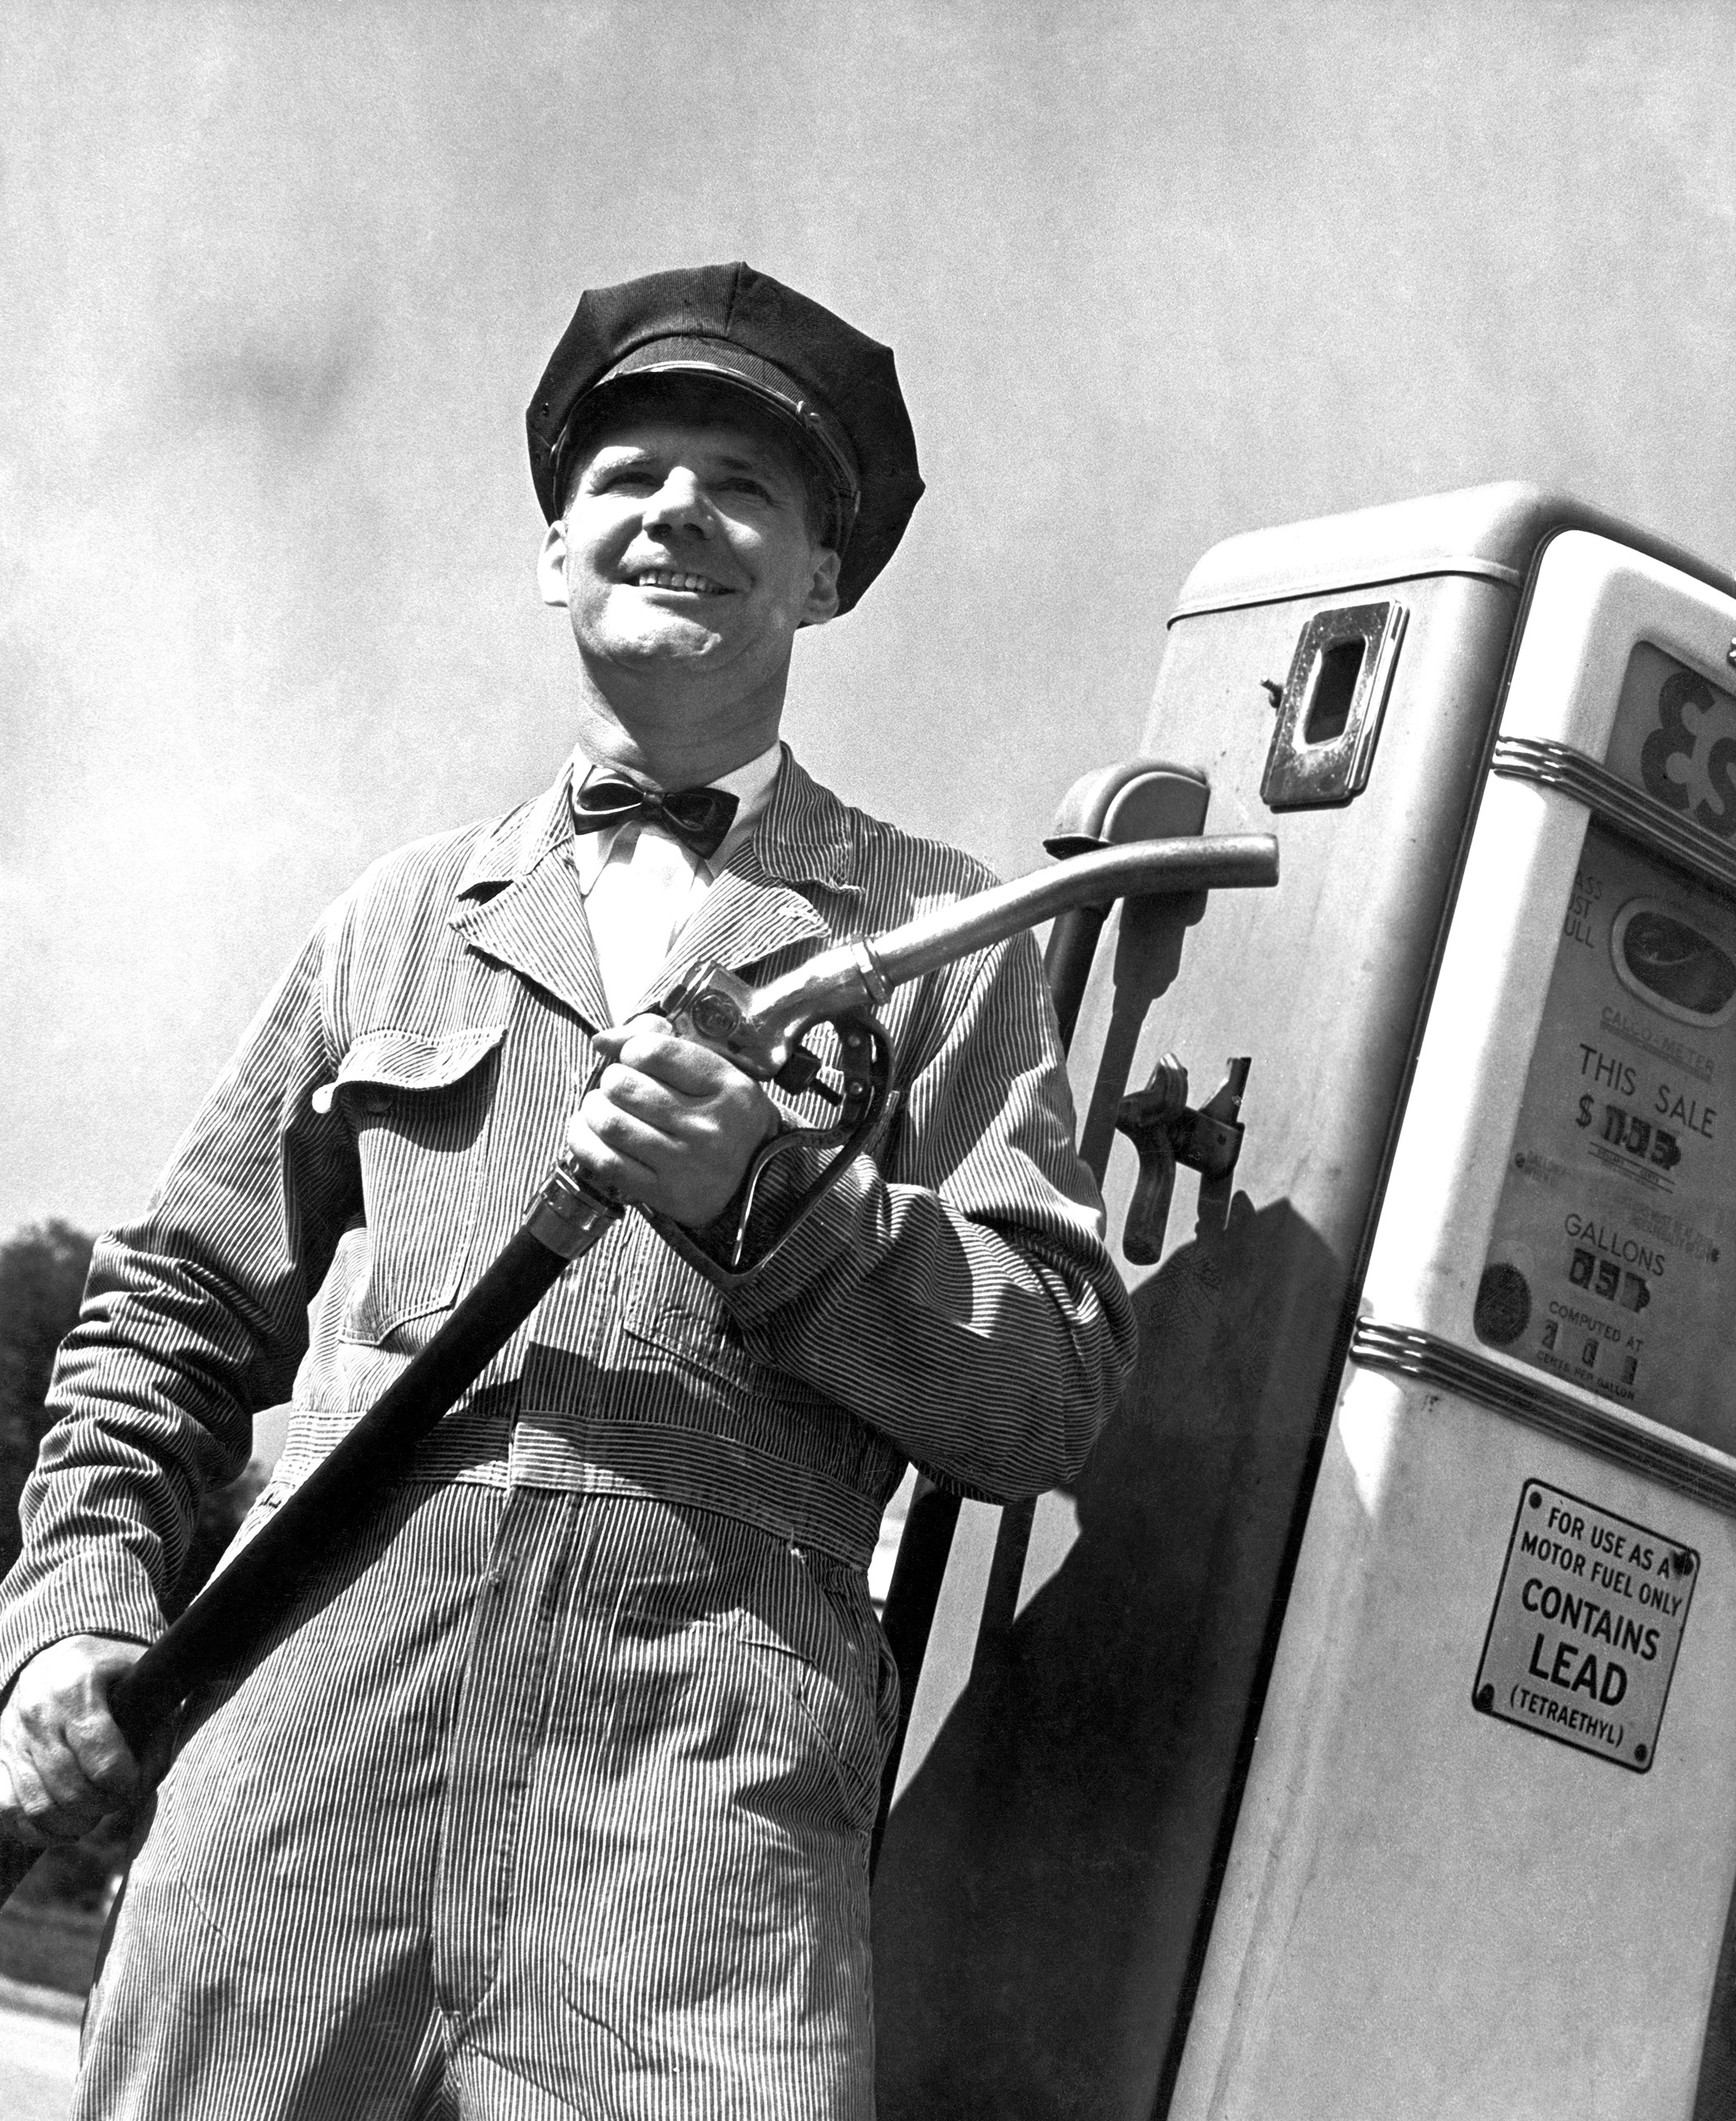 A gas pump attendant at the ready with leaded gas, circa 1955.